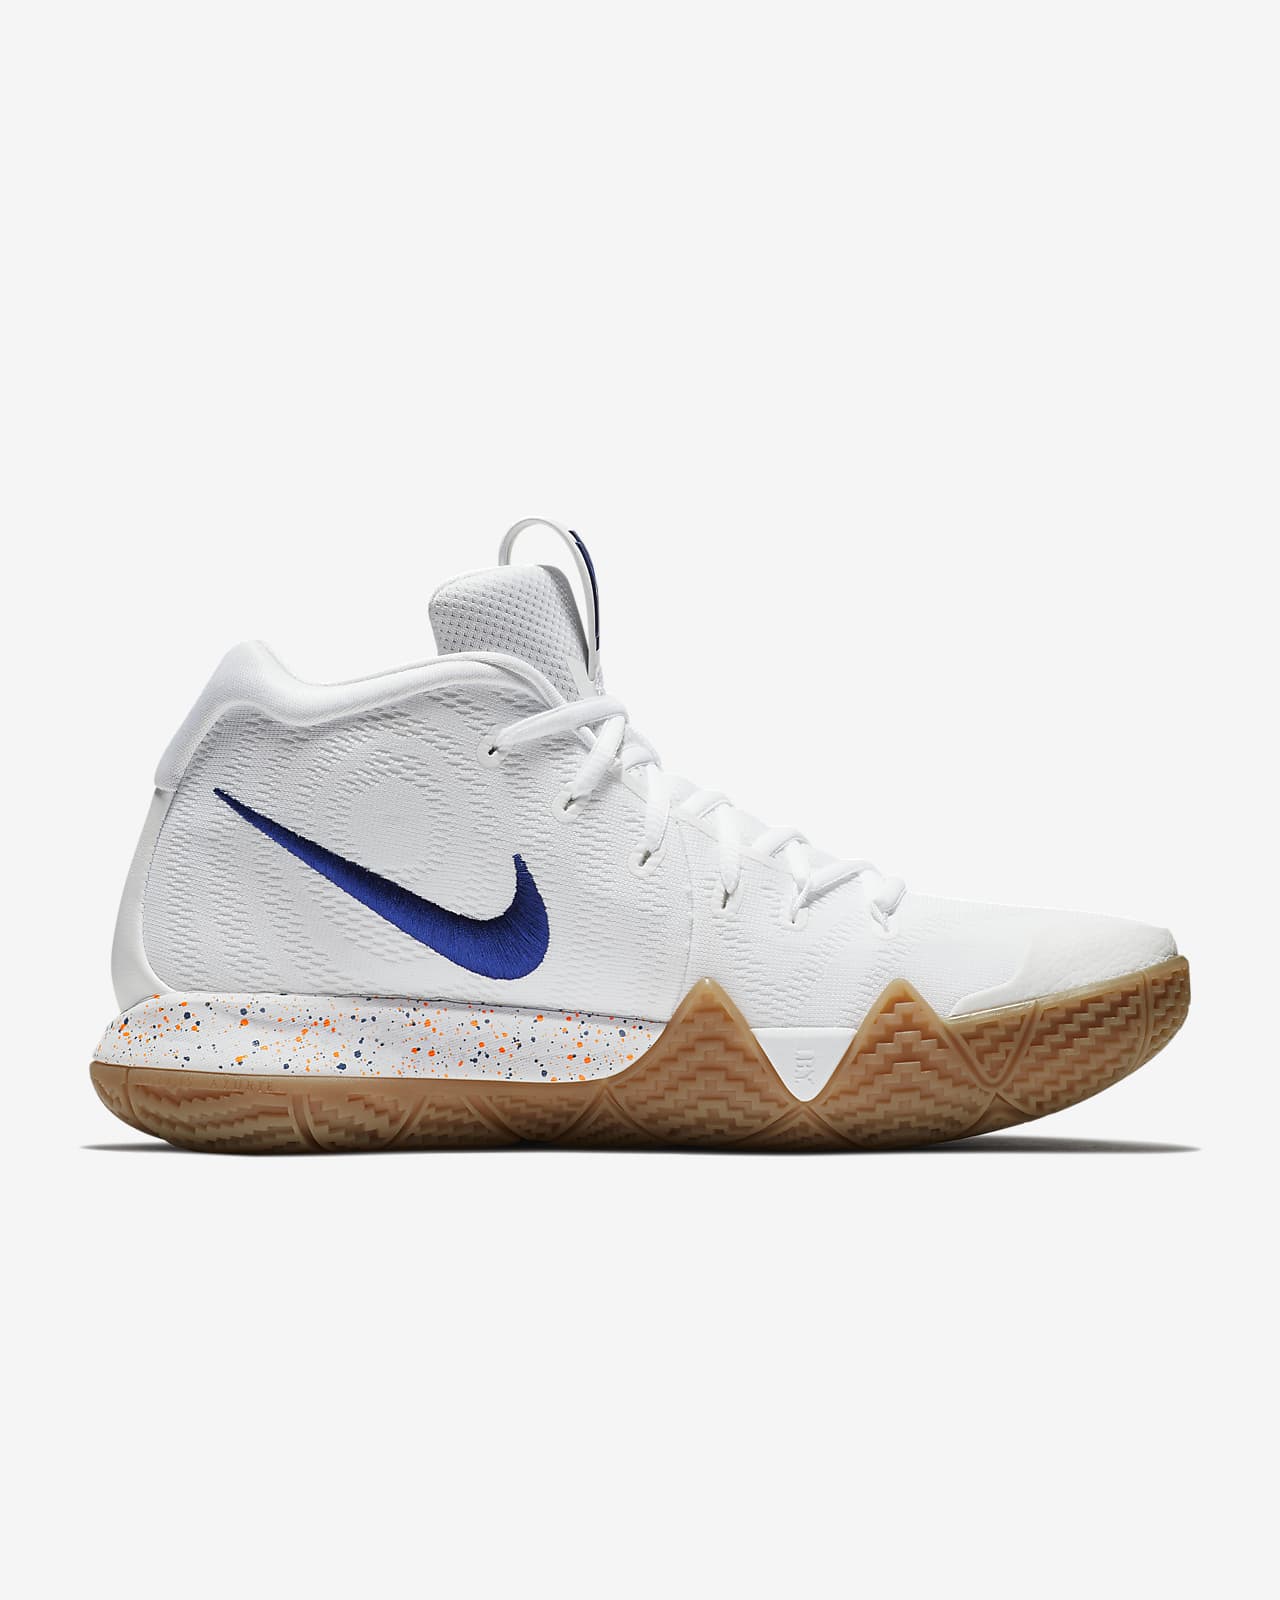 kyrie irving womens basketball shoes